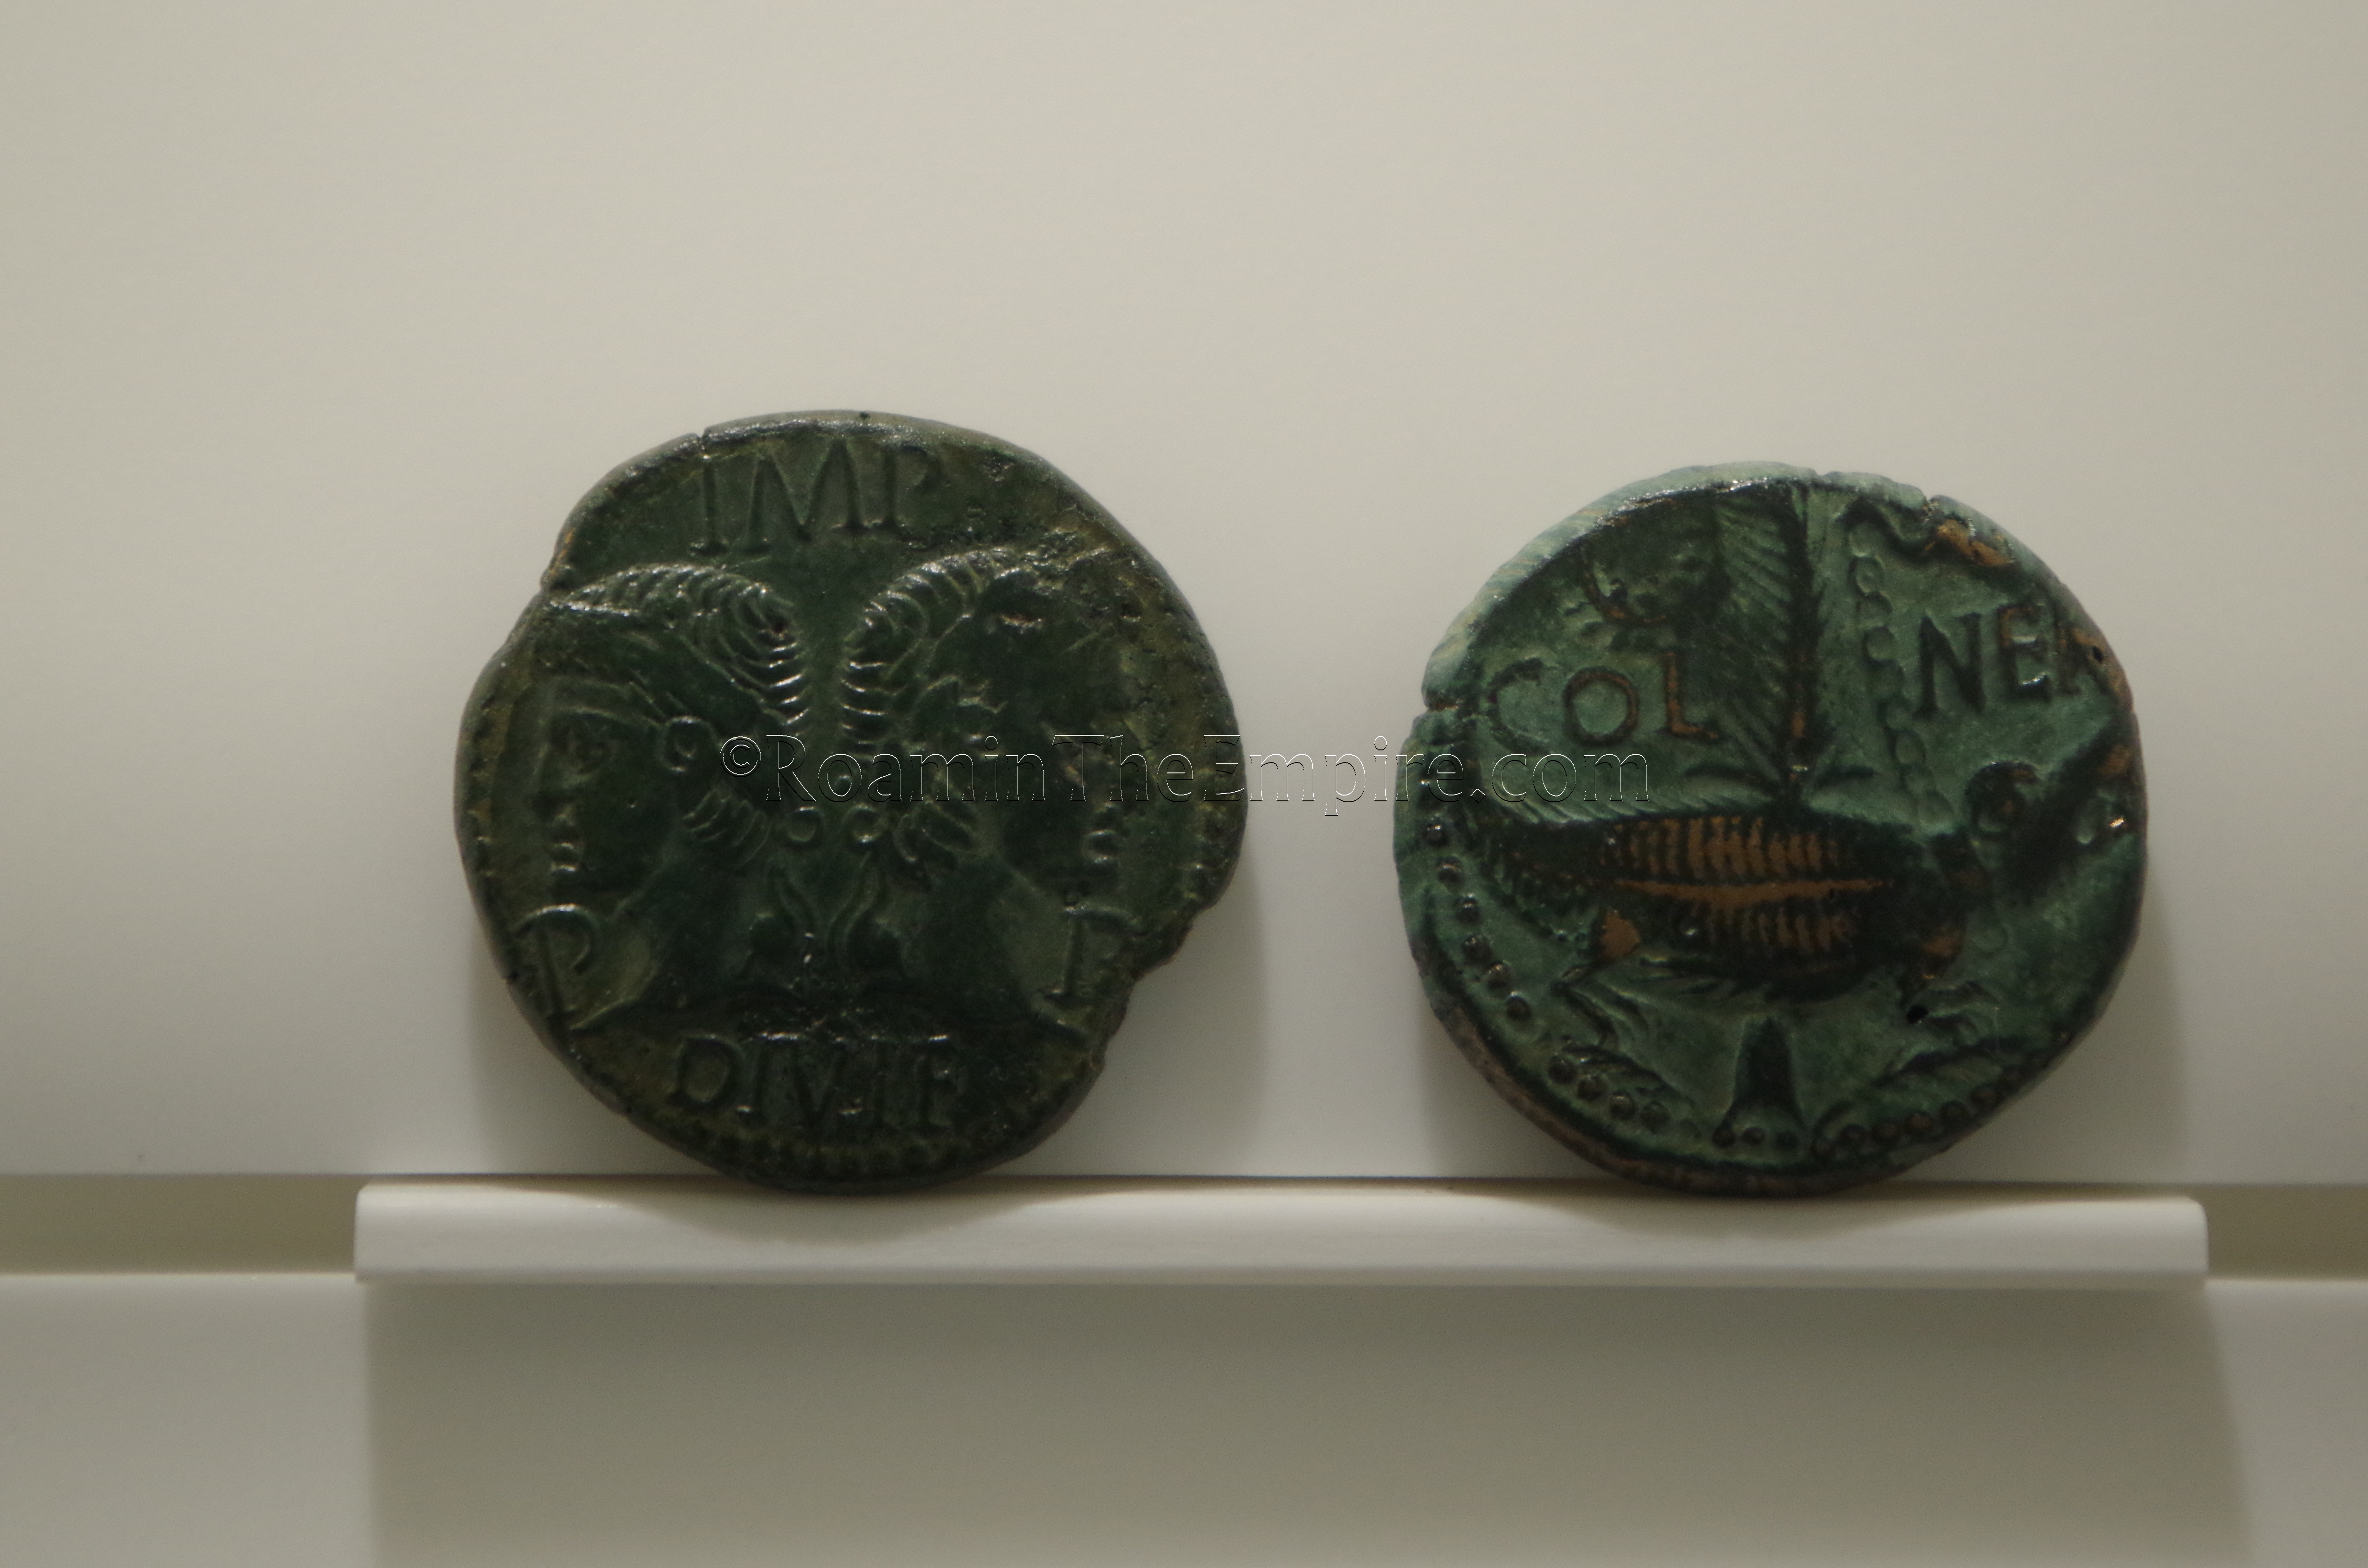 Coin featuring Augustus and Agrippa on the obverse and the crocodile chained to a palm tree, a symbol of Nemausus, on the reverse. Dated to 14/15 CE and displayed in the Musée de la Romanité.